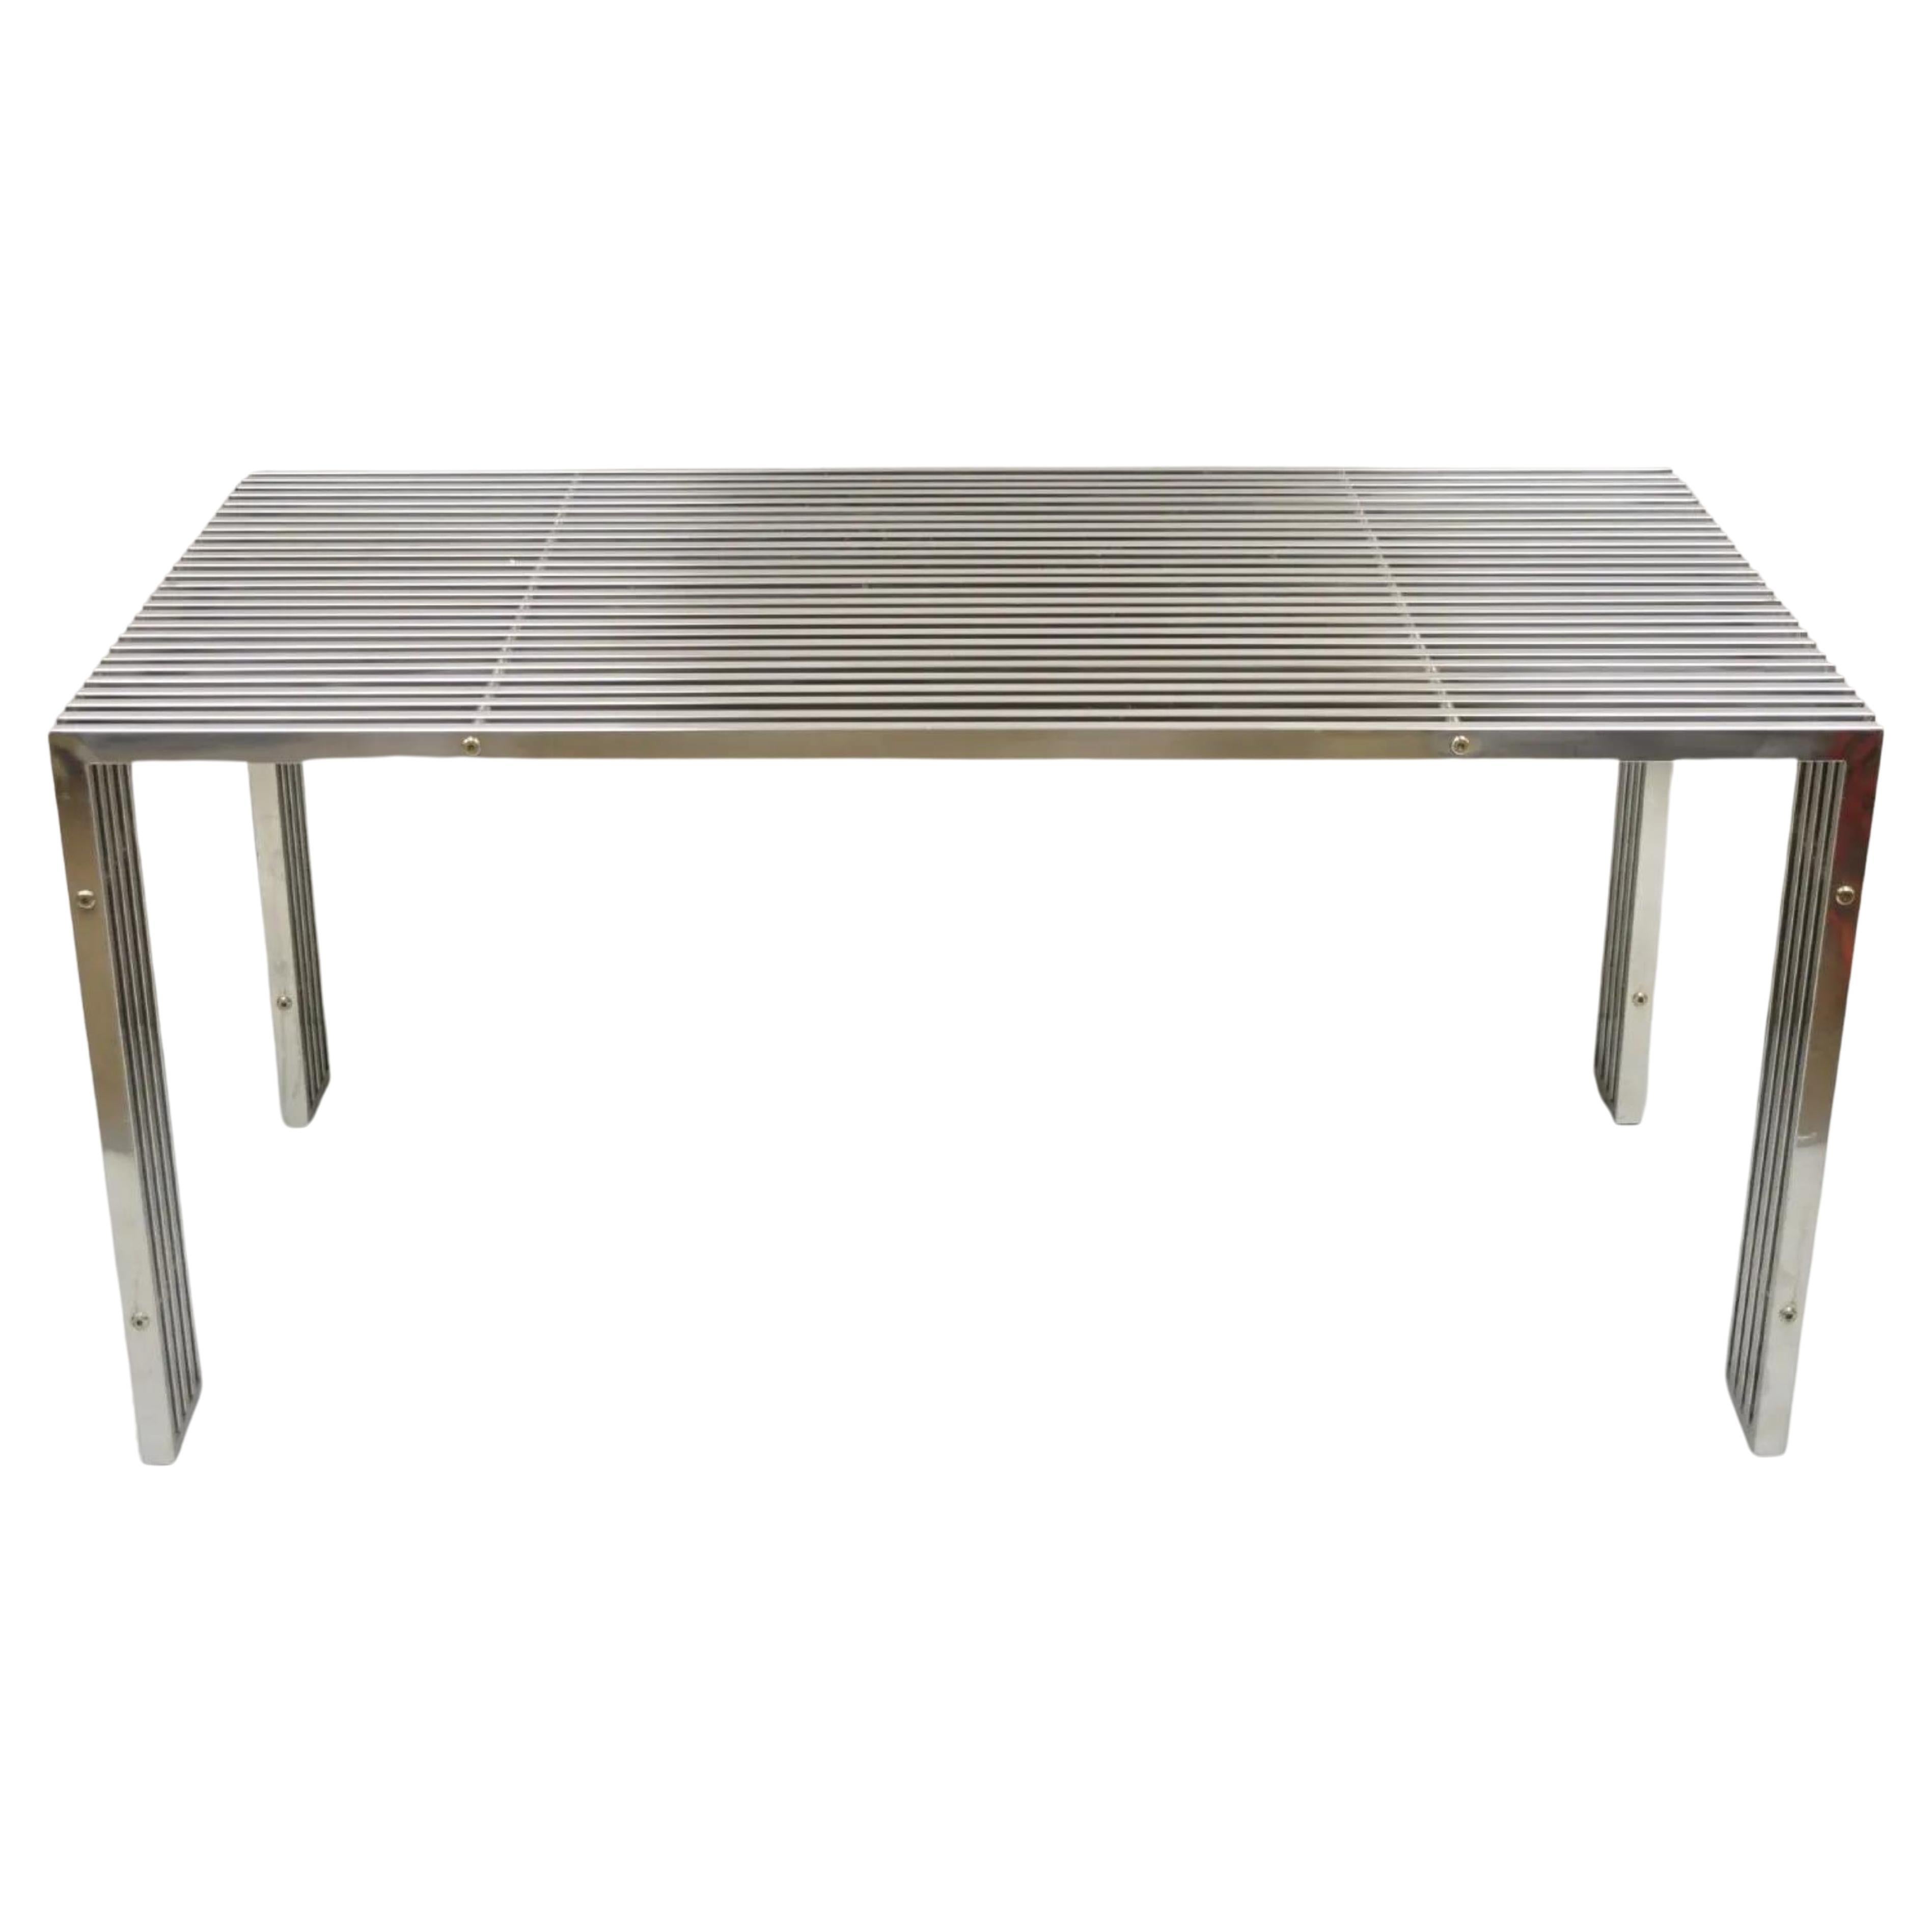 Contemporary Modern Gridiron Stainless Steel Metal Post-Modern Dining Table Desk